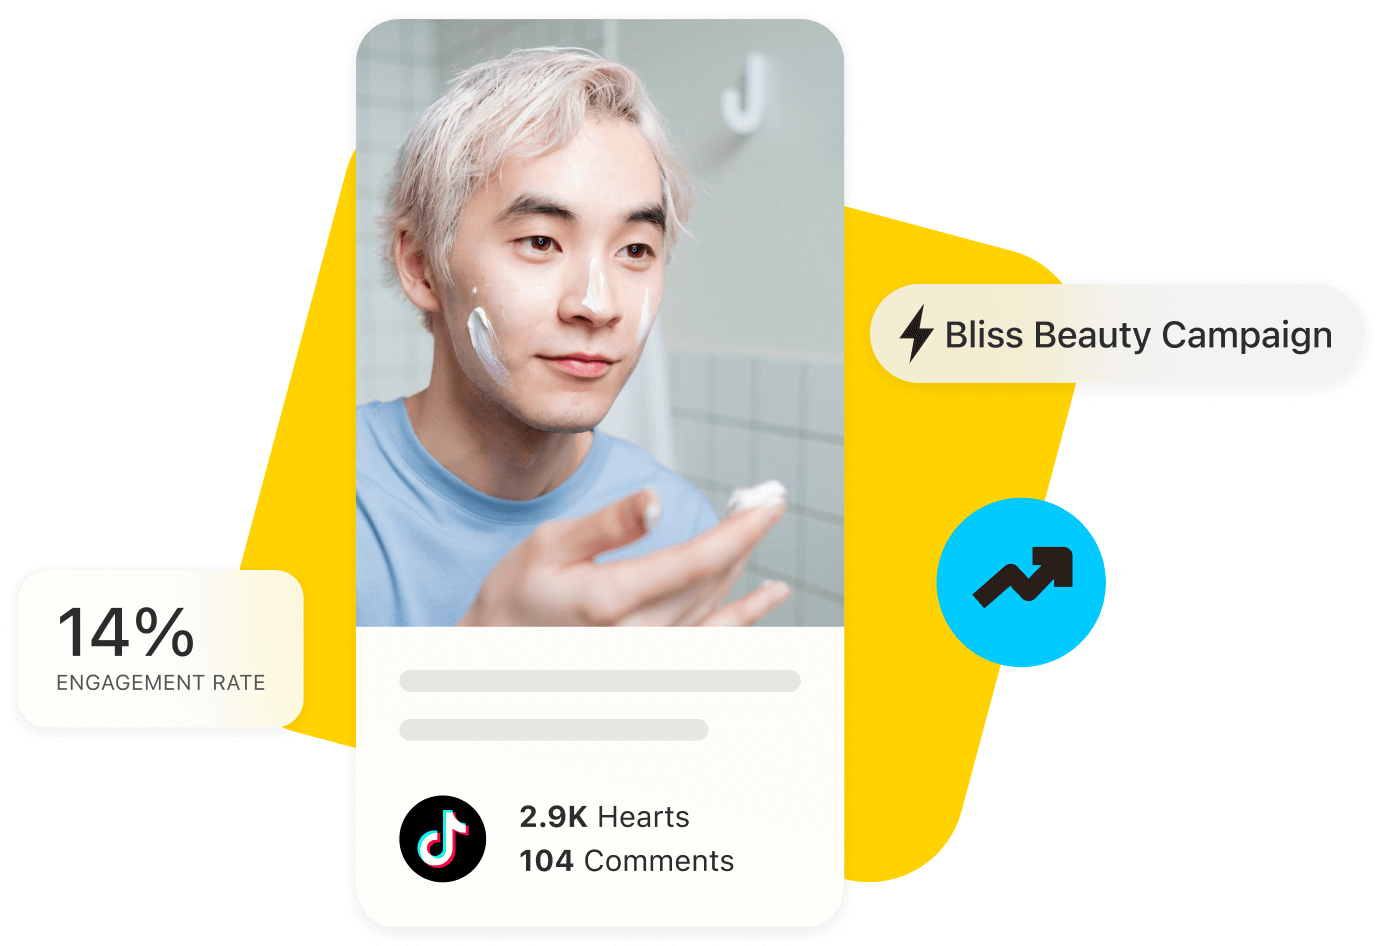 Bliss Beauty works with a skincare influencer using the Later Campaign Management Platform